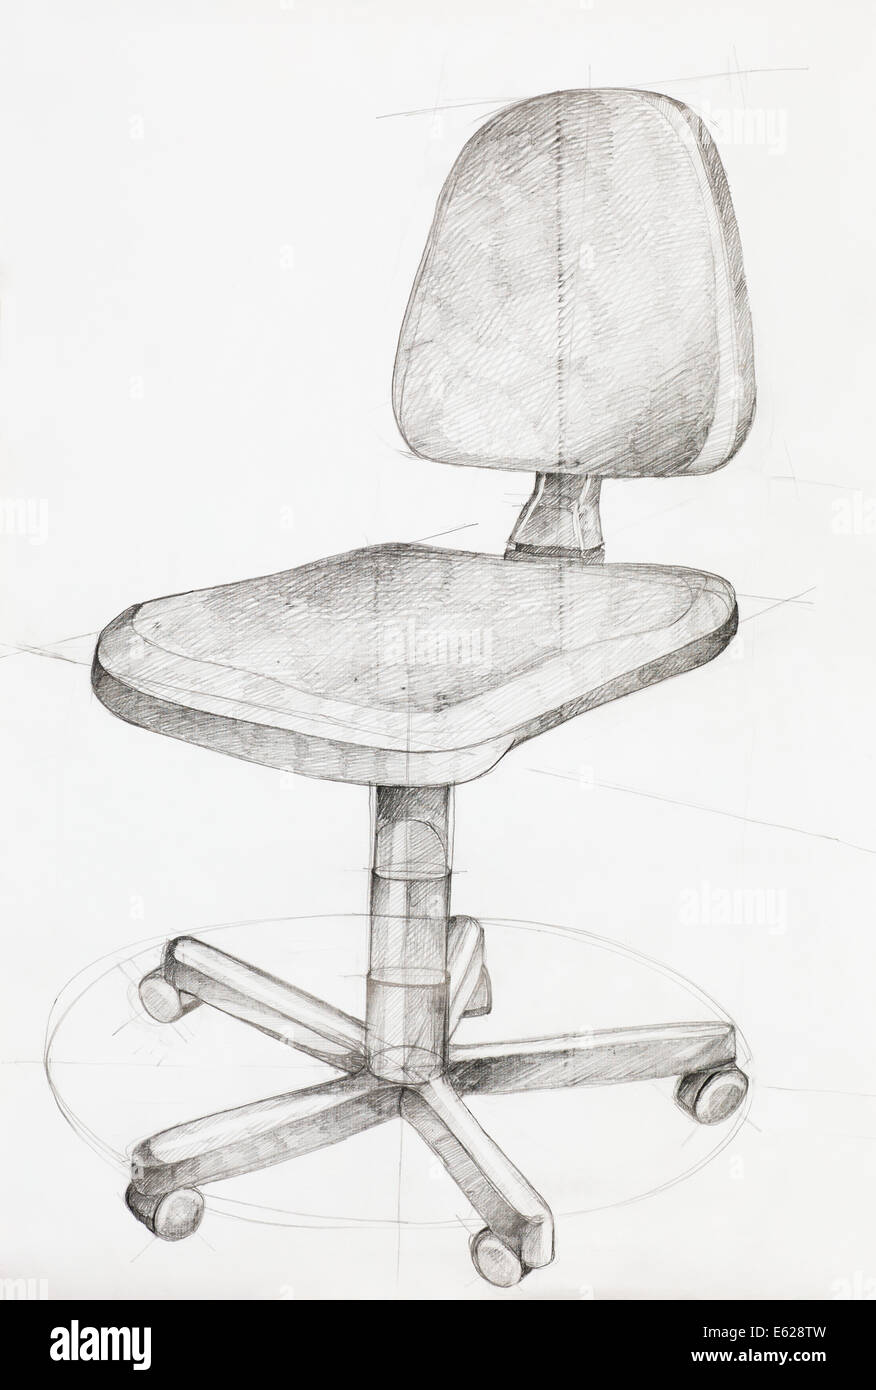 15200 Chair Sketches Stock Photos Pictures  RoyaltyFree Images  iStock